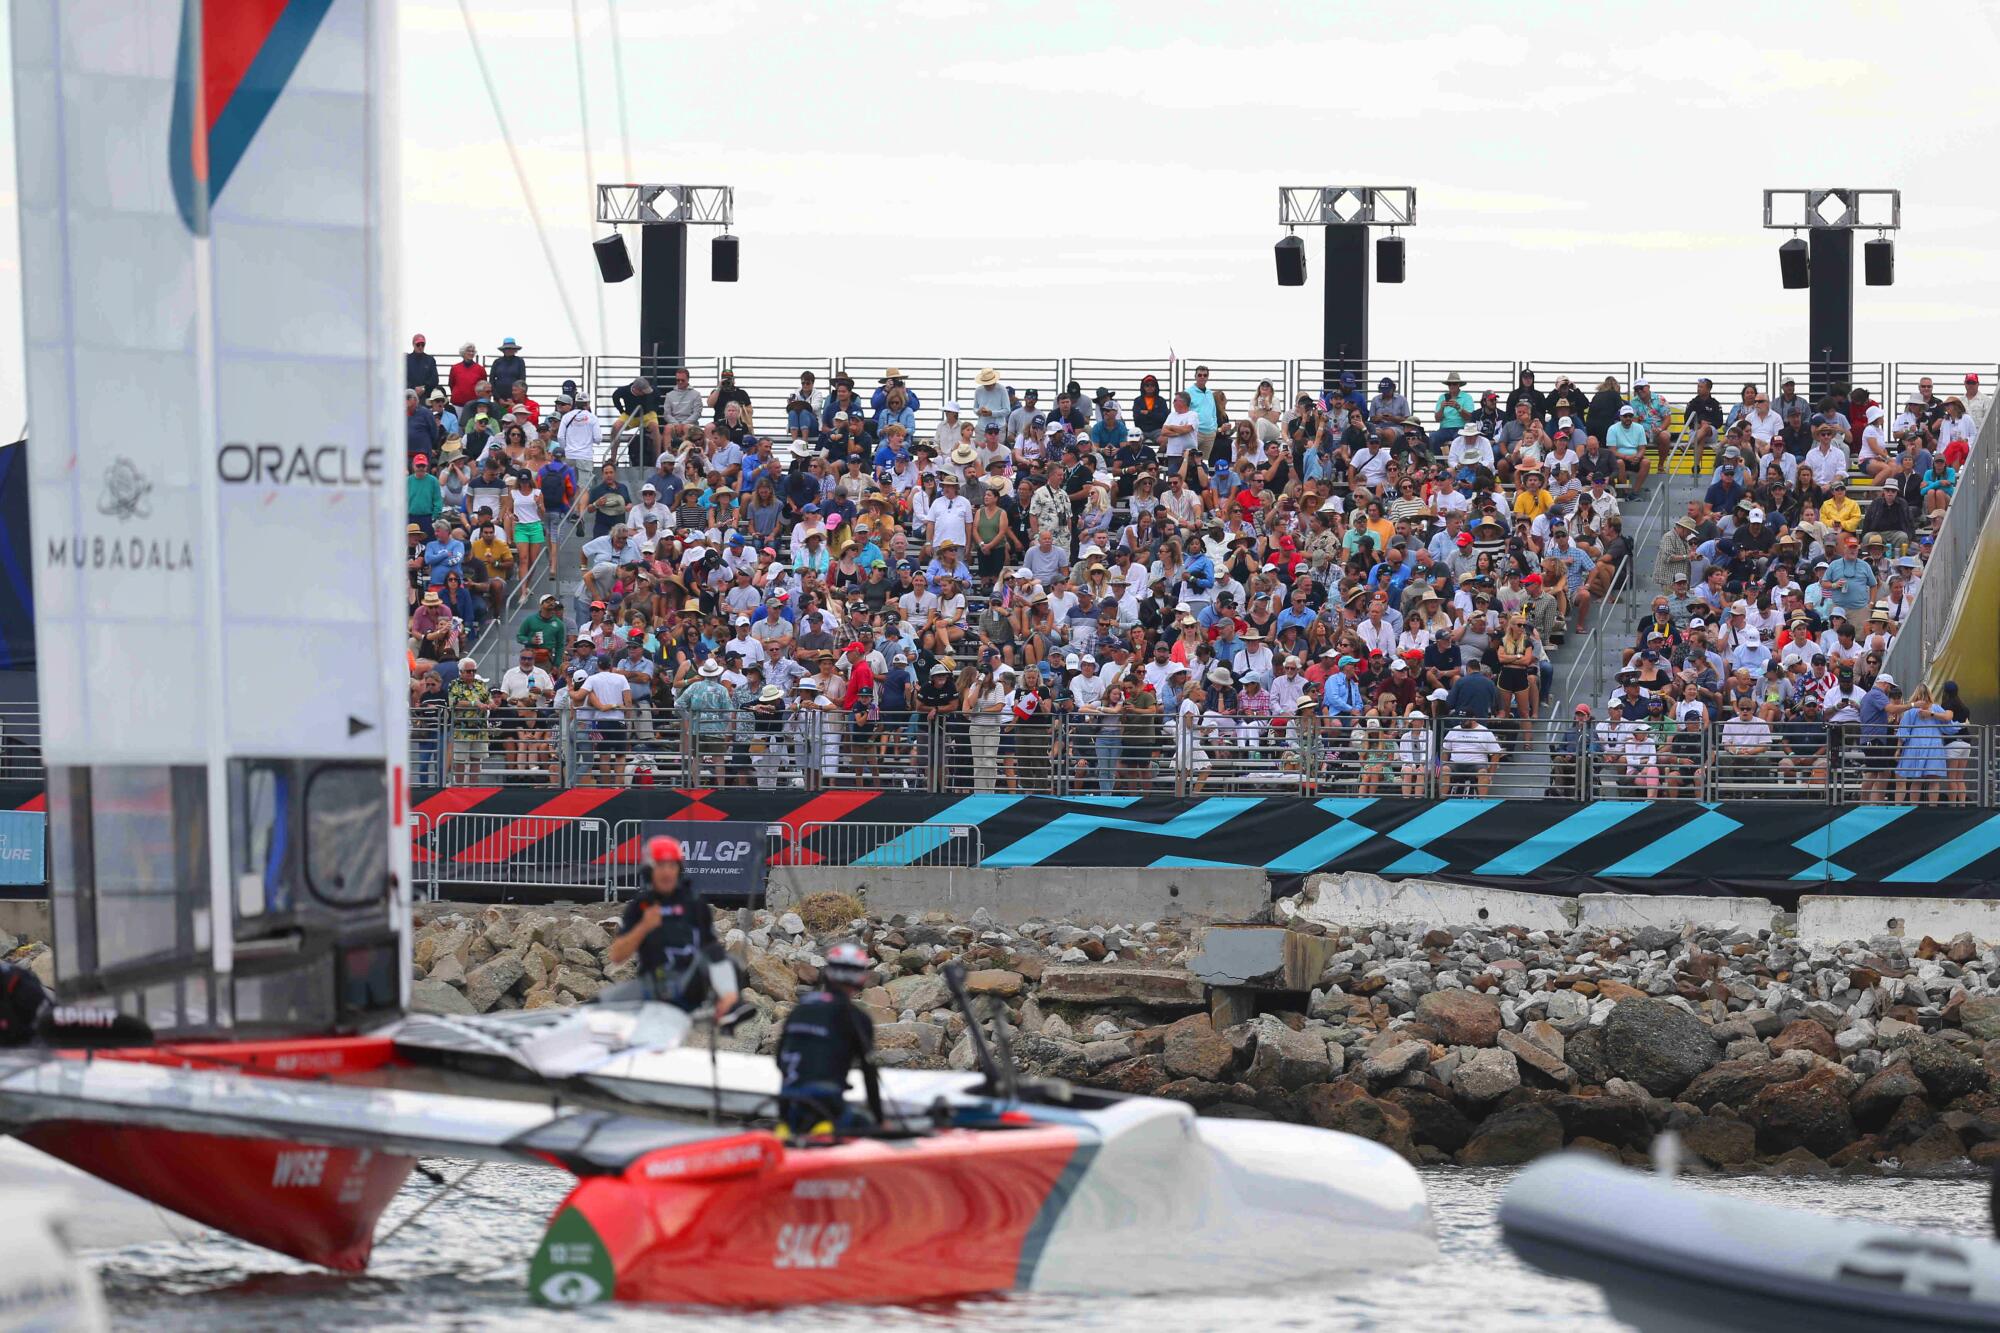 Oracle Los Angeles Sail Grand Prix at the Port of Los Angeles on Sunday, July 23, 2023 in